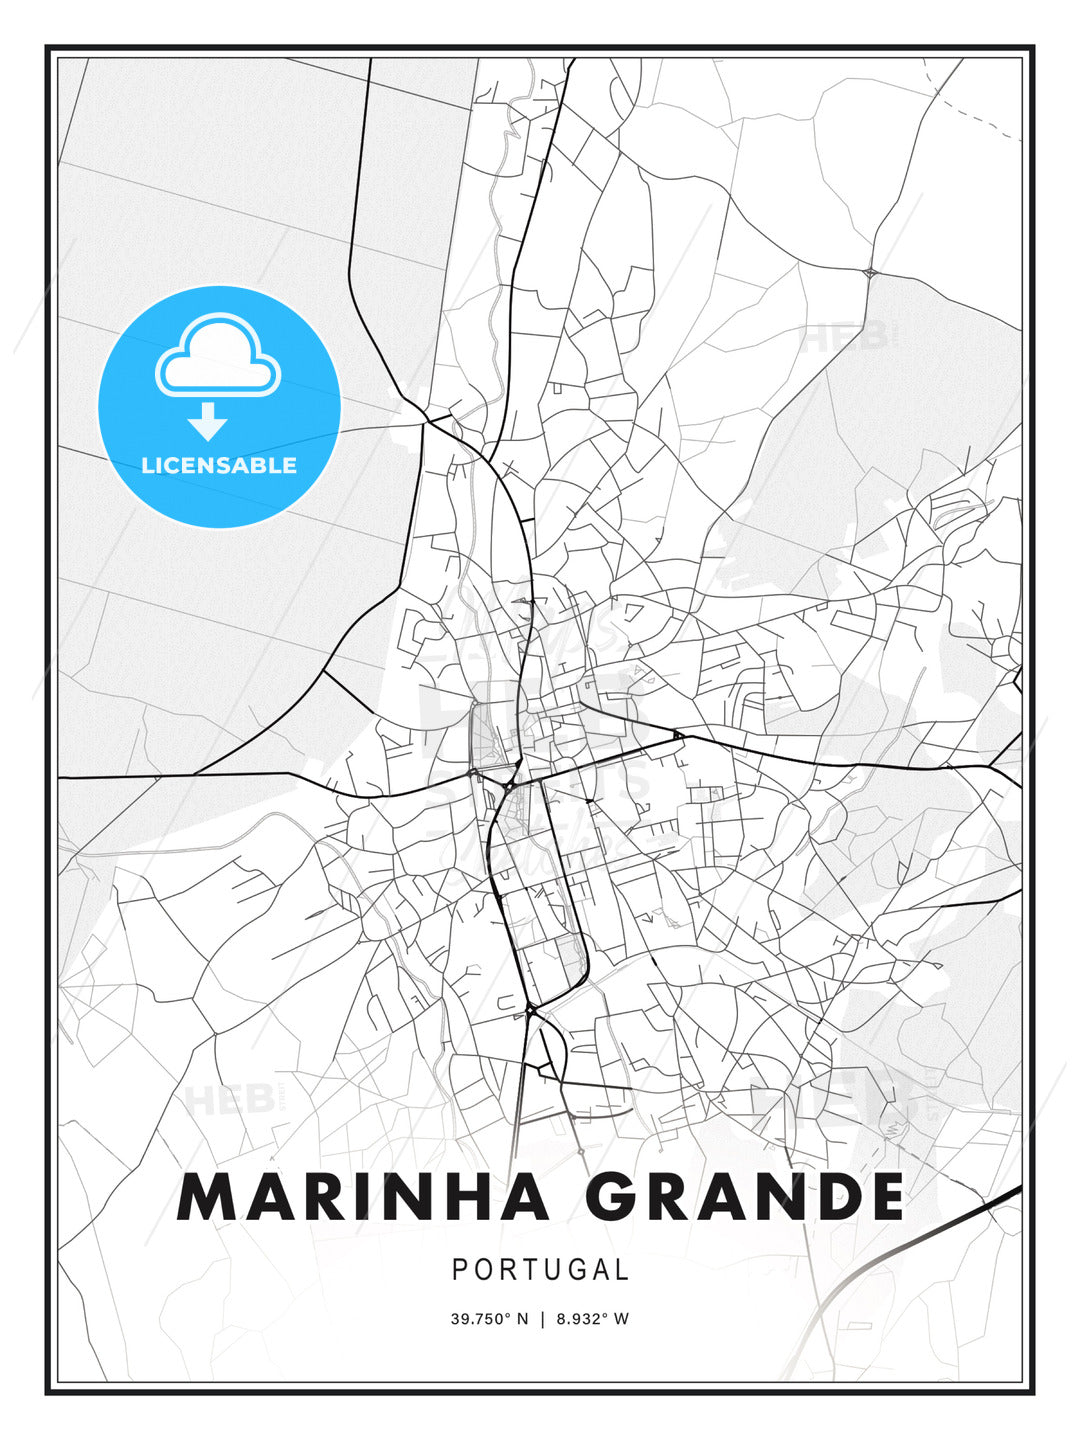 Marinha Grande, Portugal, Modern Print Template in Various Formats - HEBSTREITS Sketches